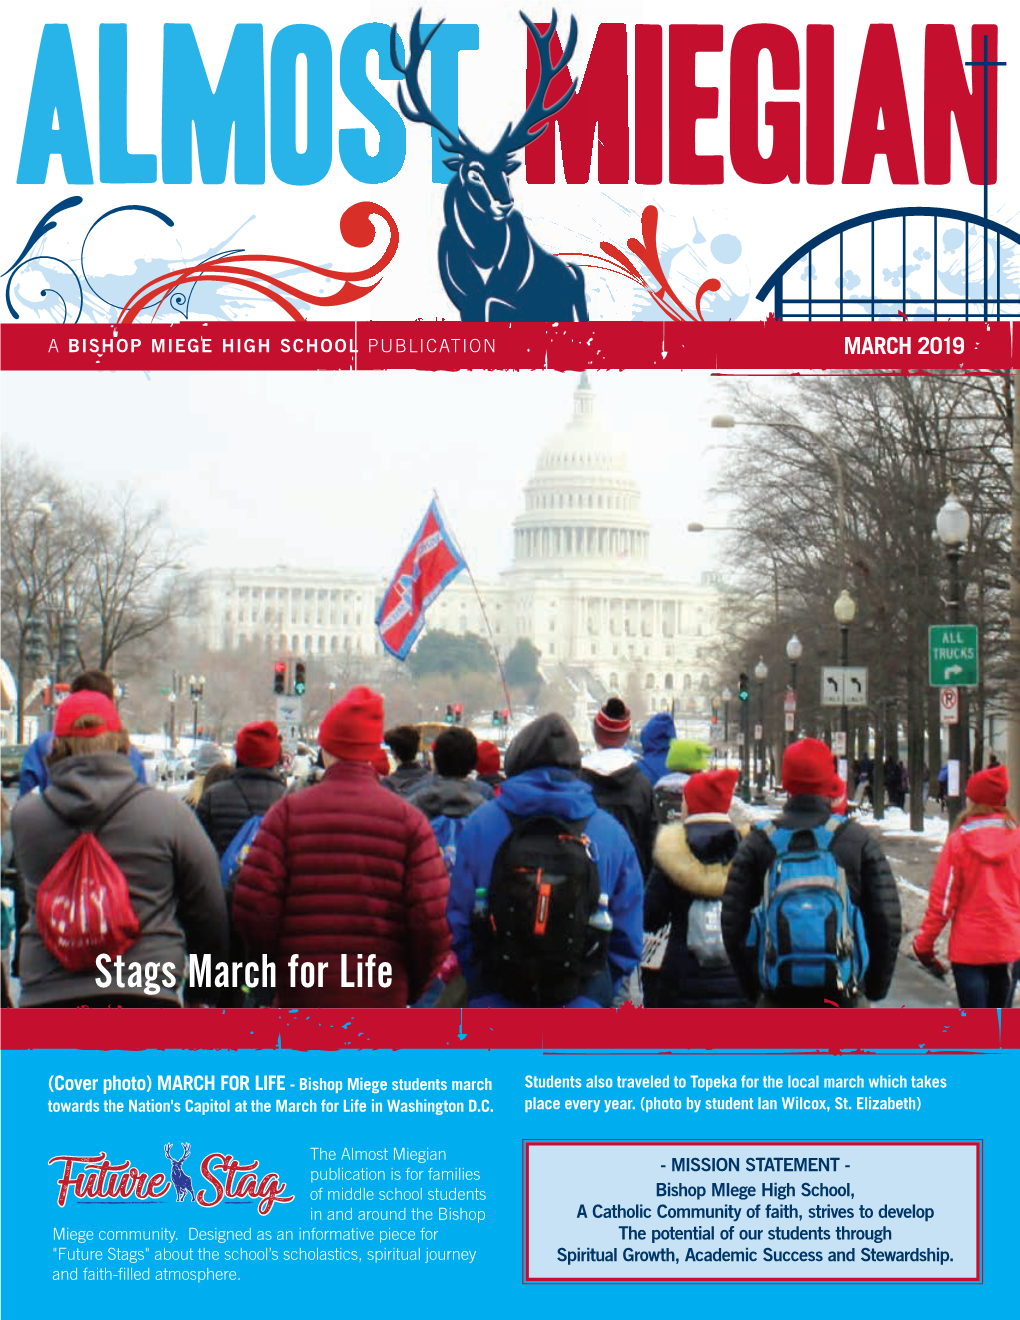 Stags March for Life